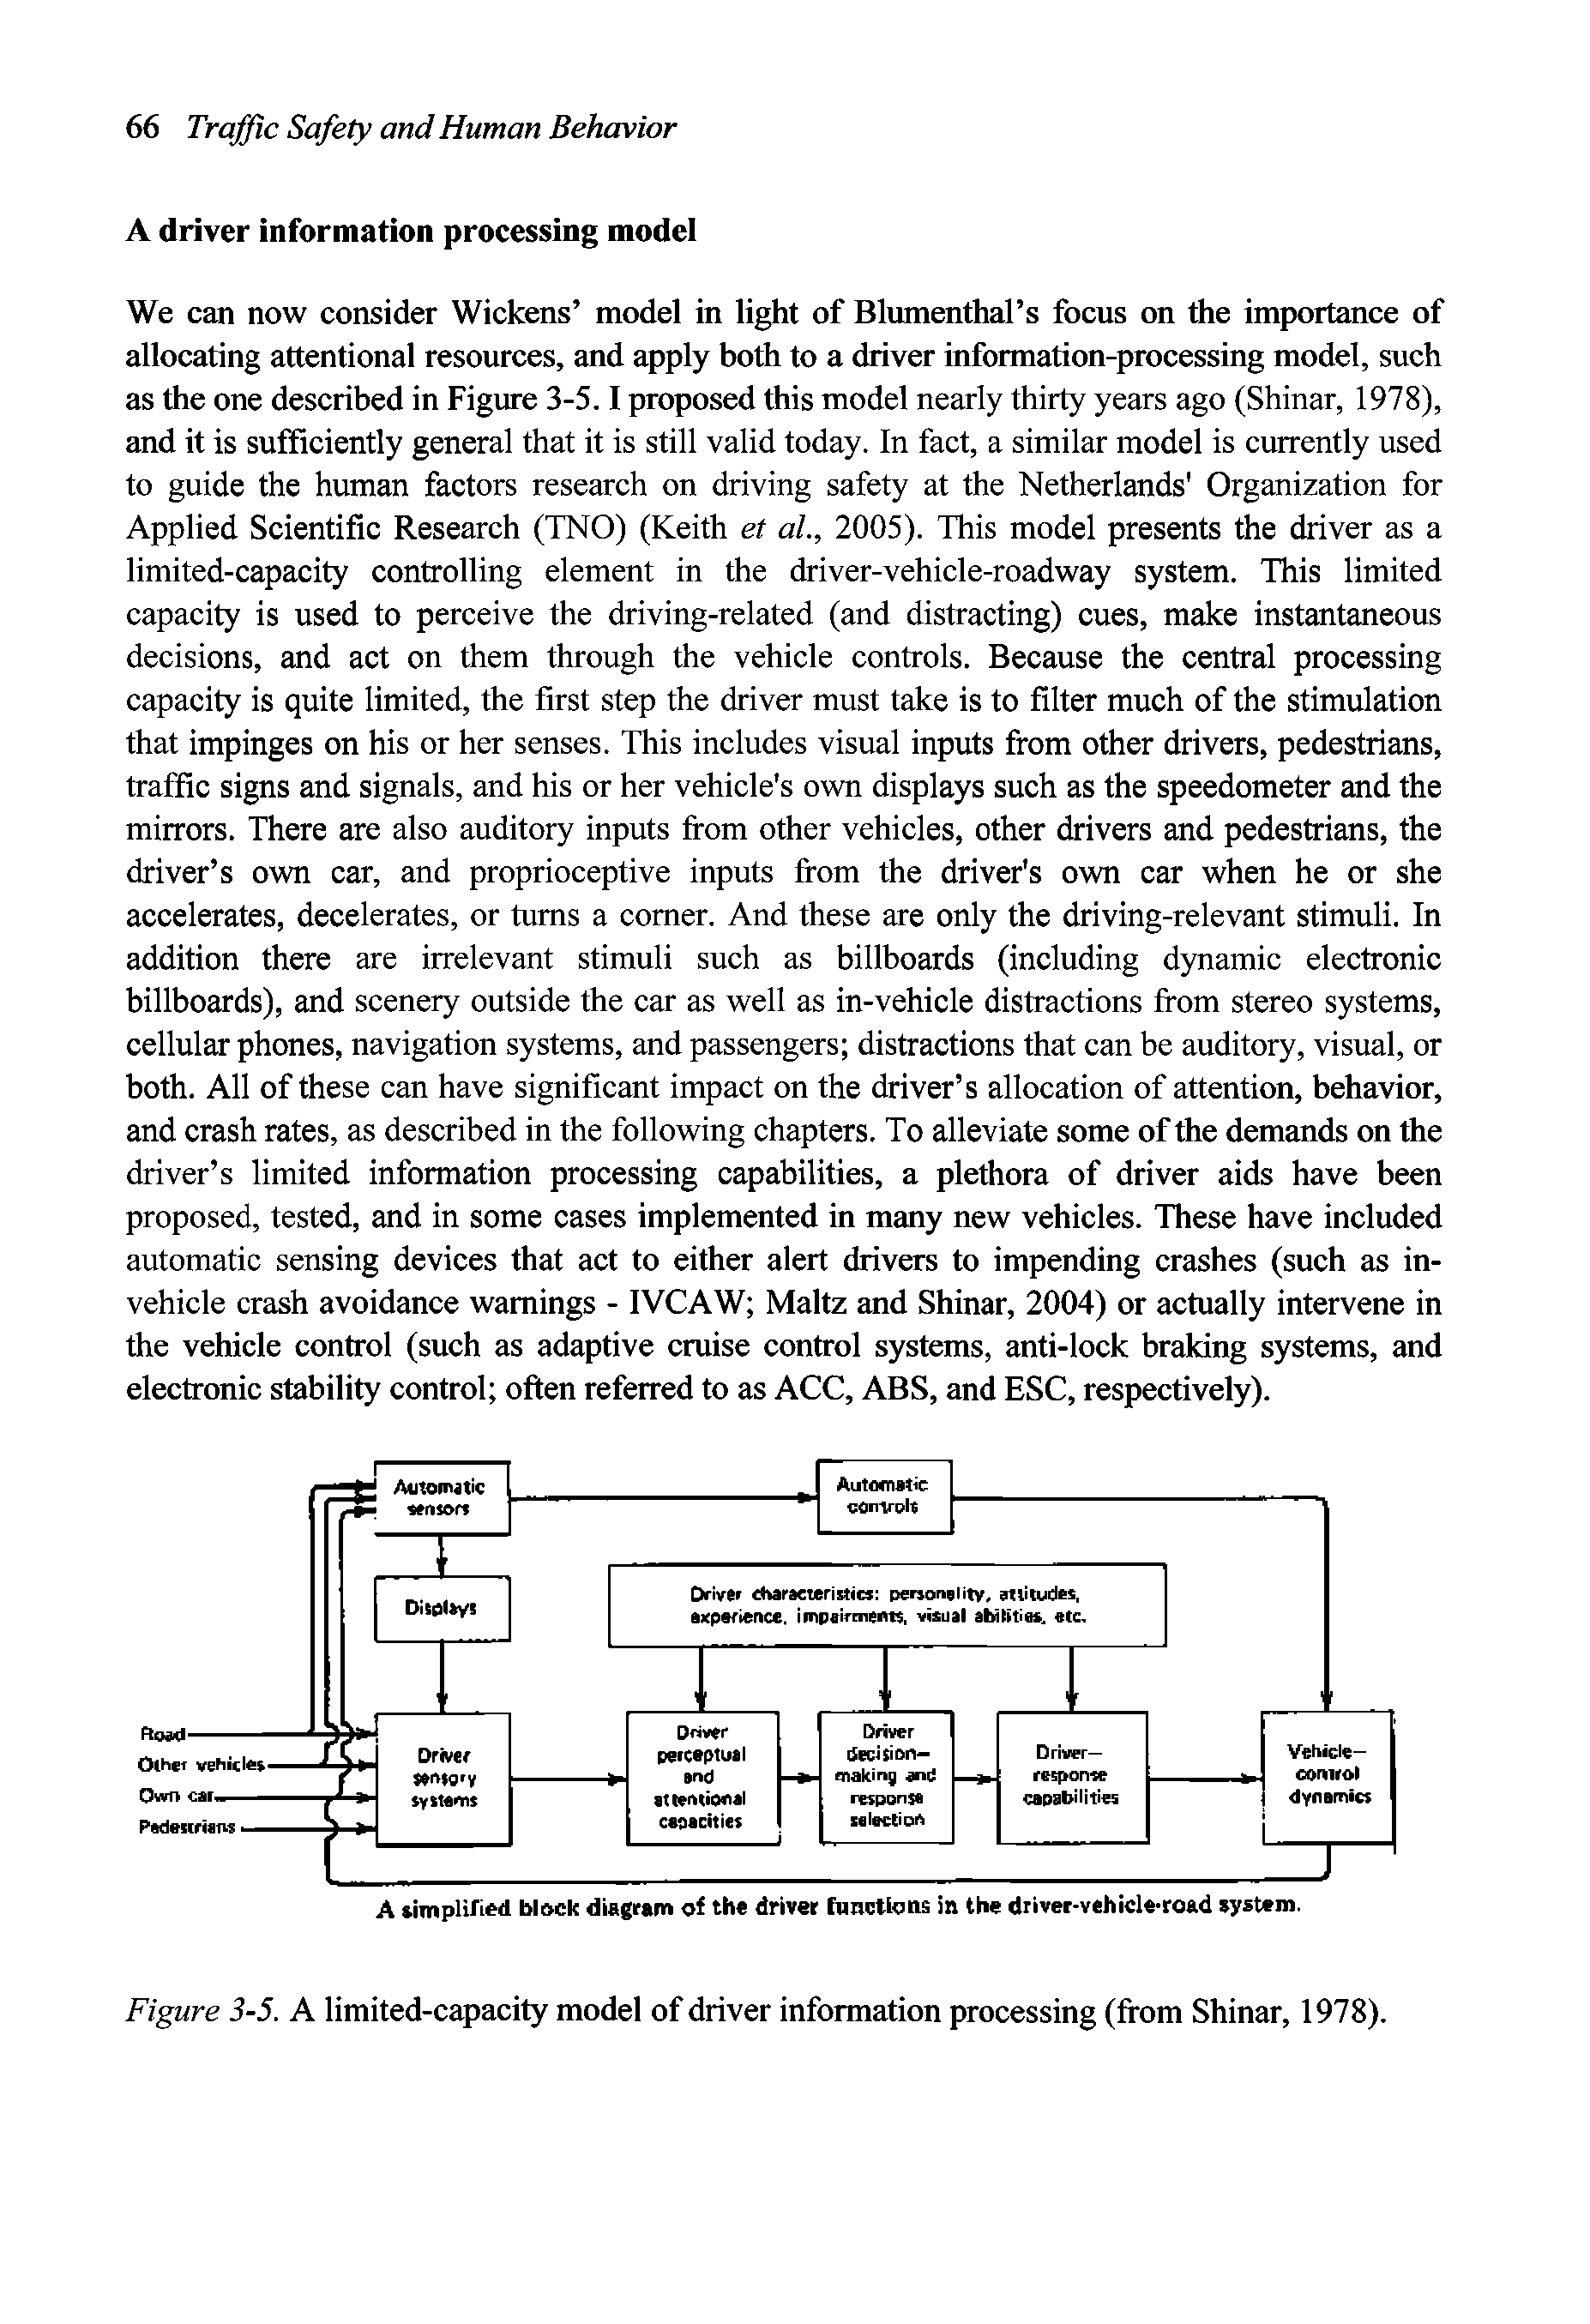 Figure 3-5, A limited-capacity model of driver information processing (from Shinar, 1978).